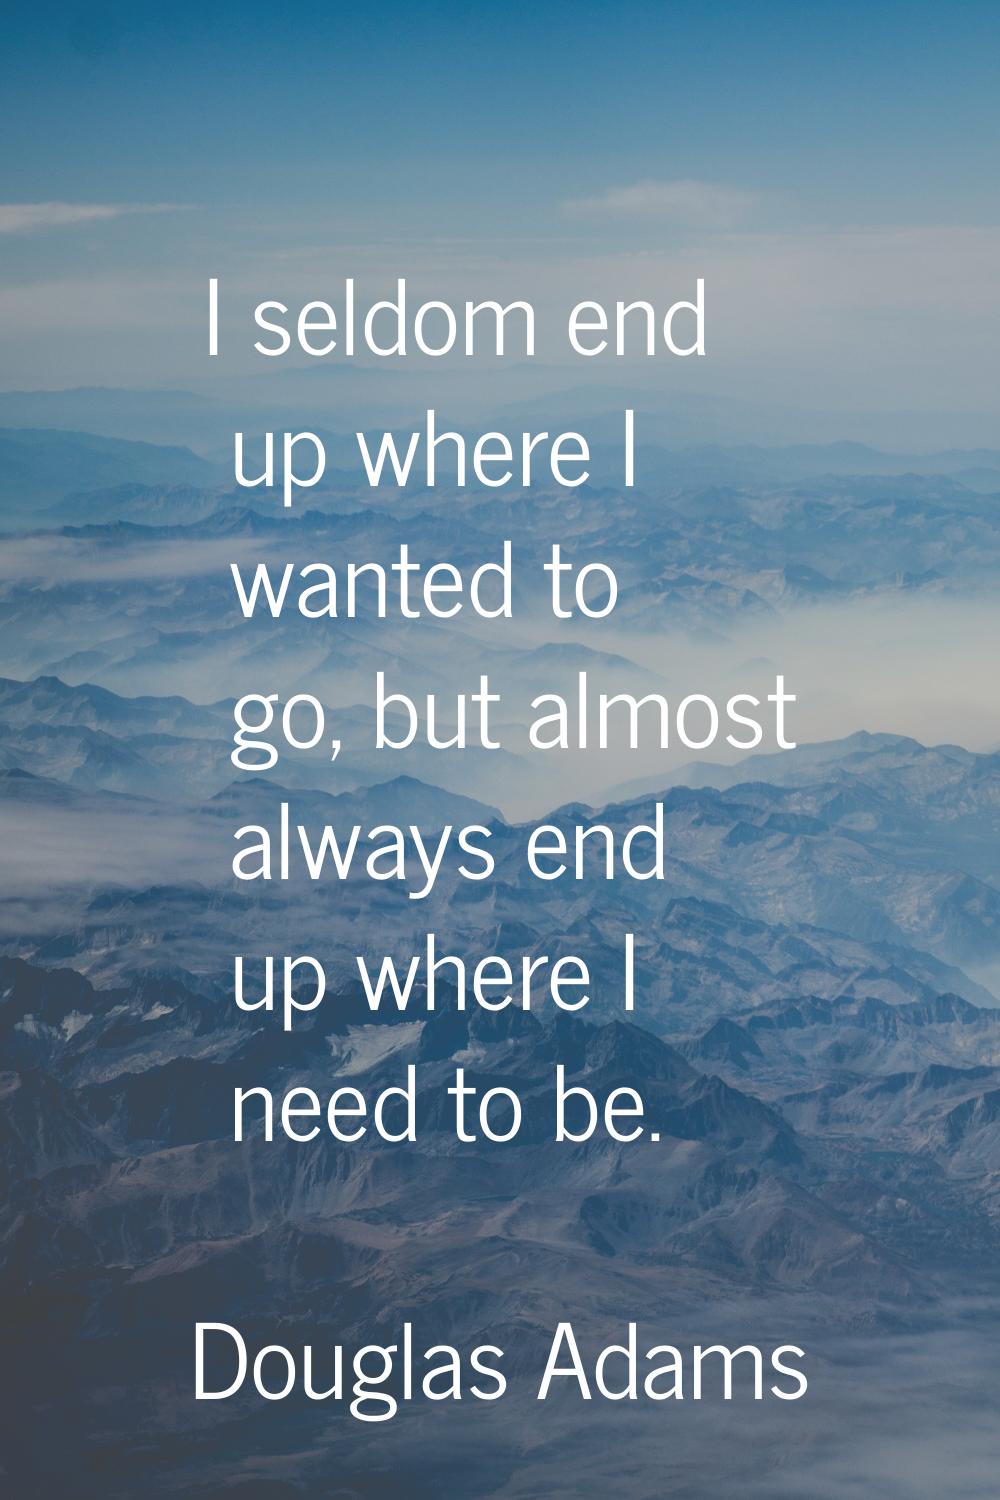 I seldom end up where I wanted to go, but almost always end up where I need to be.